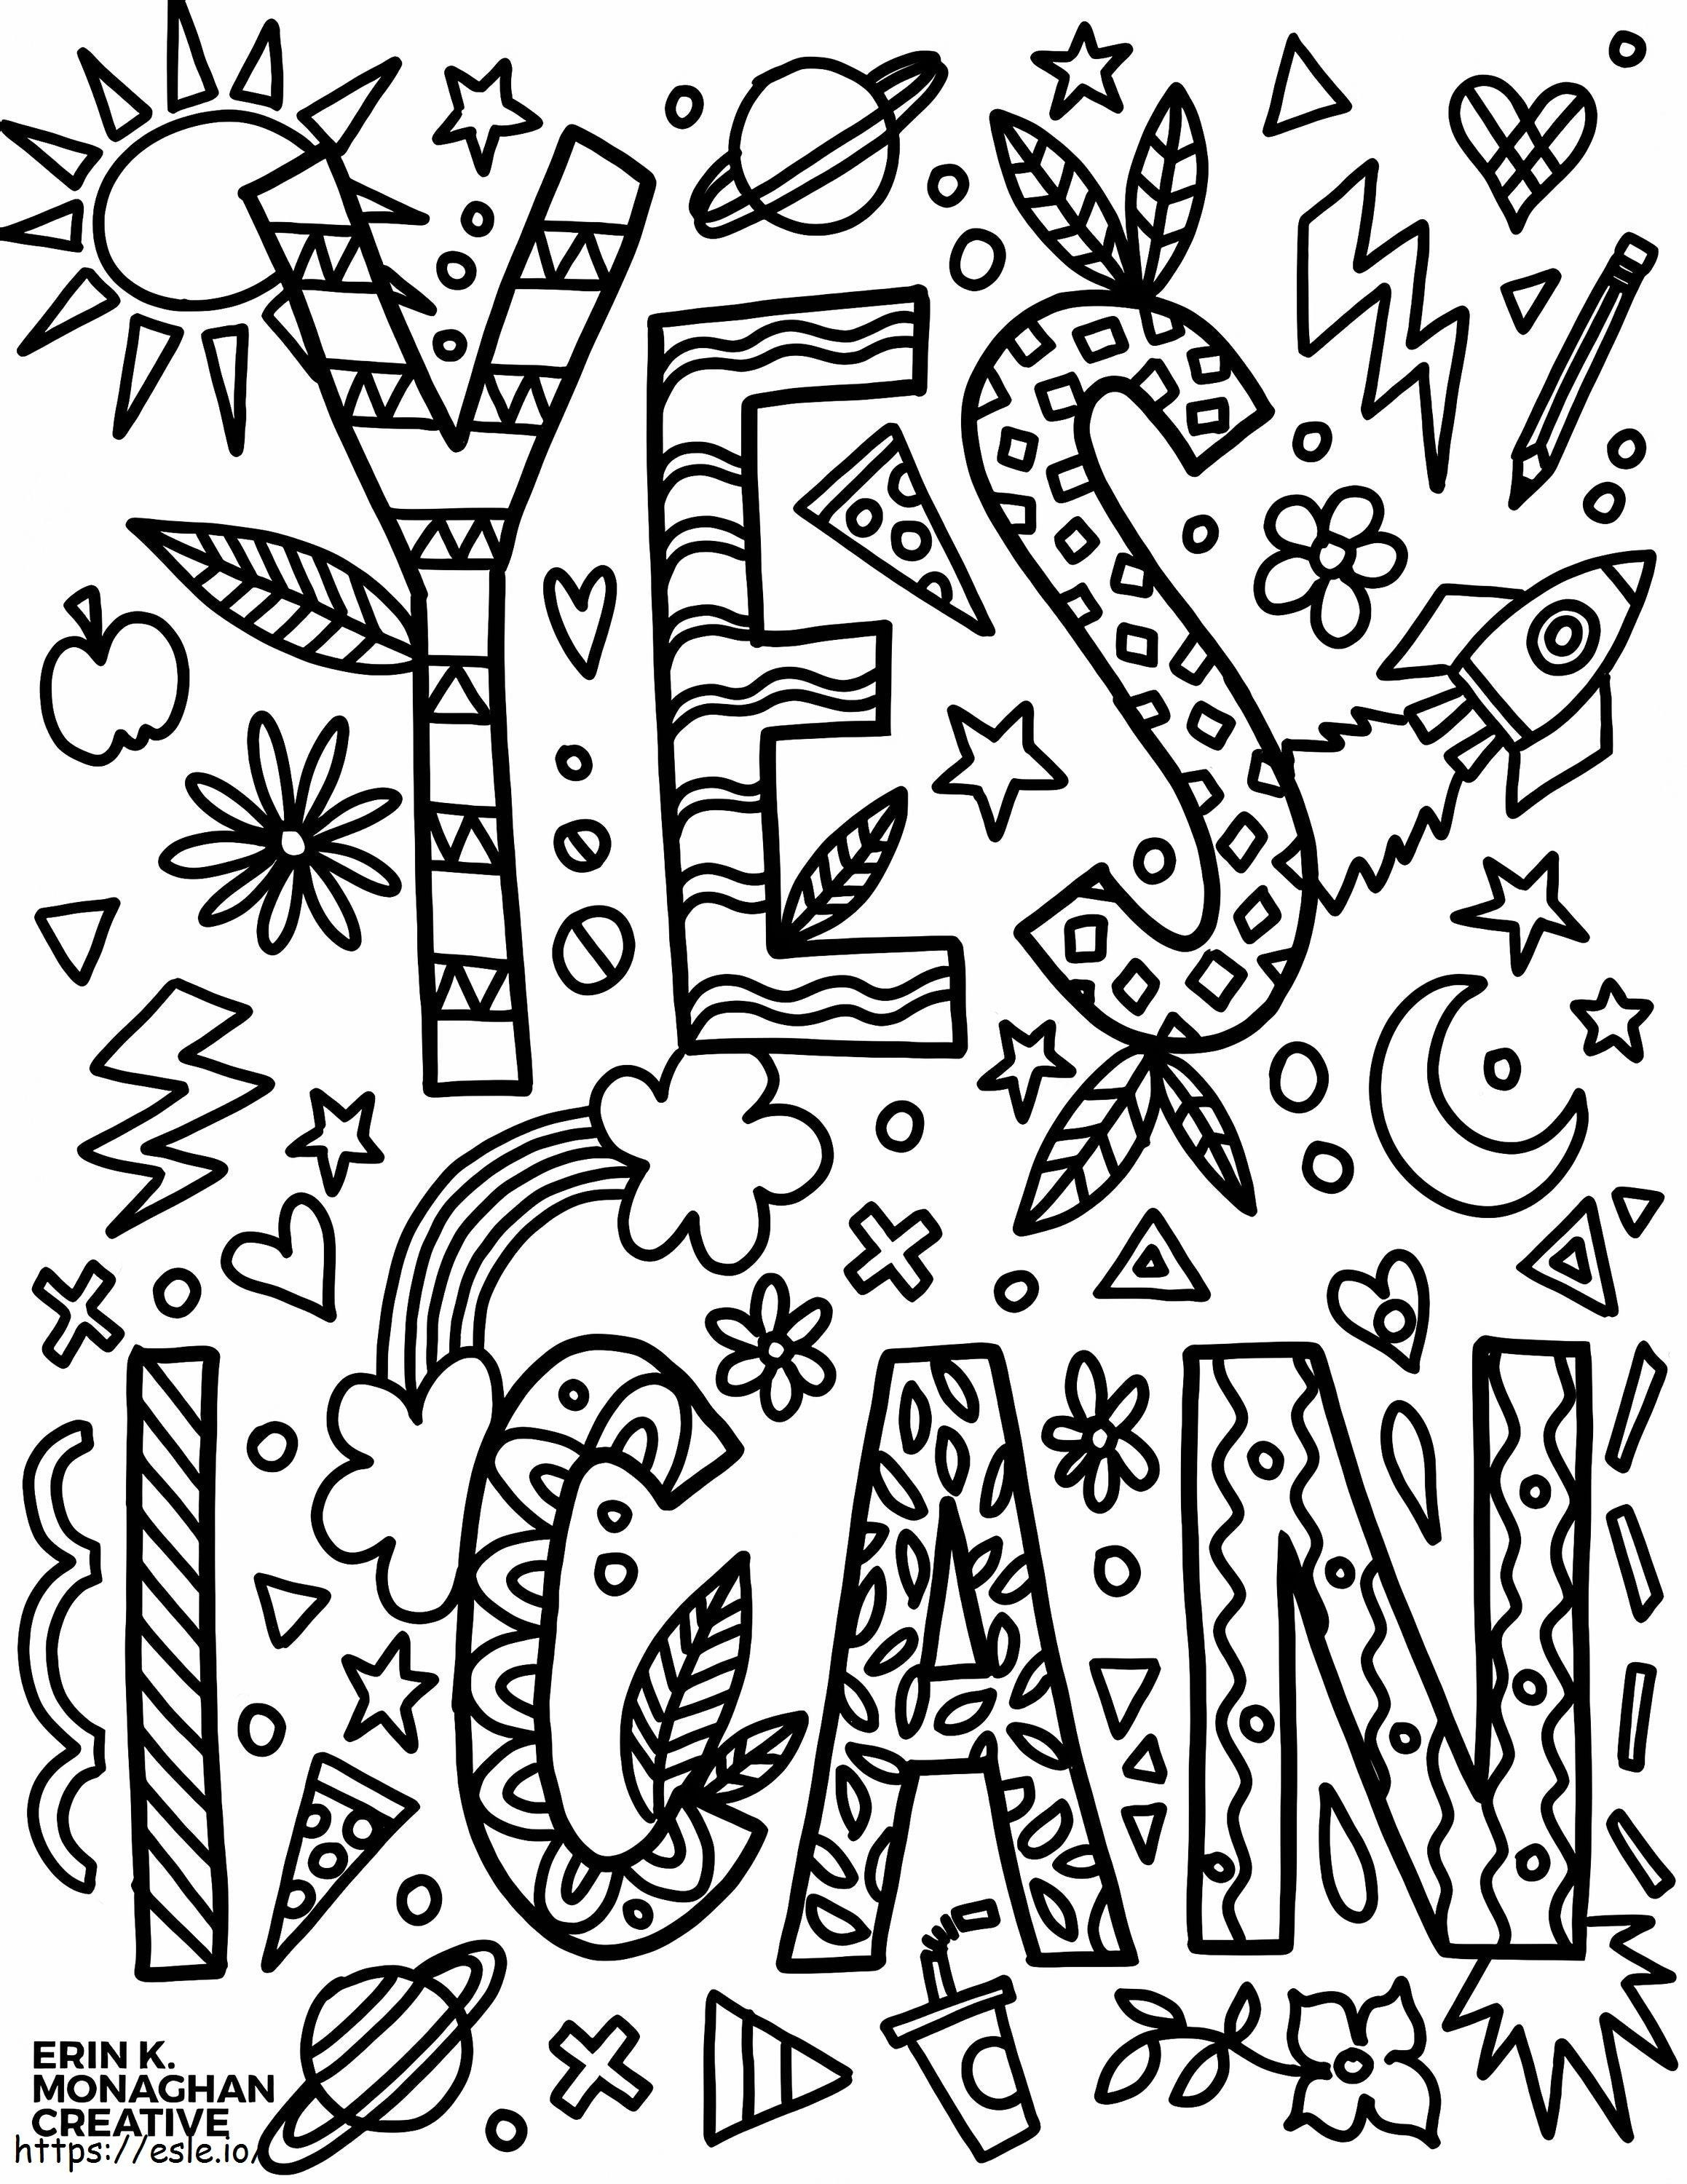 Yes I Can coloring page